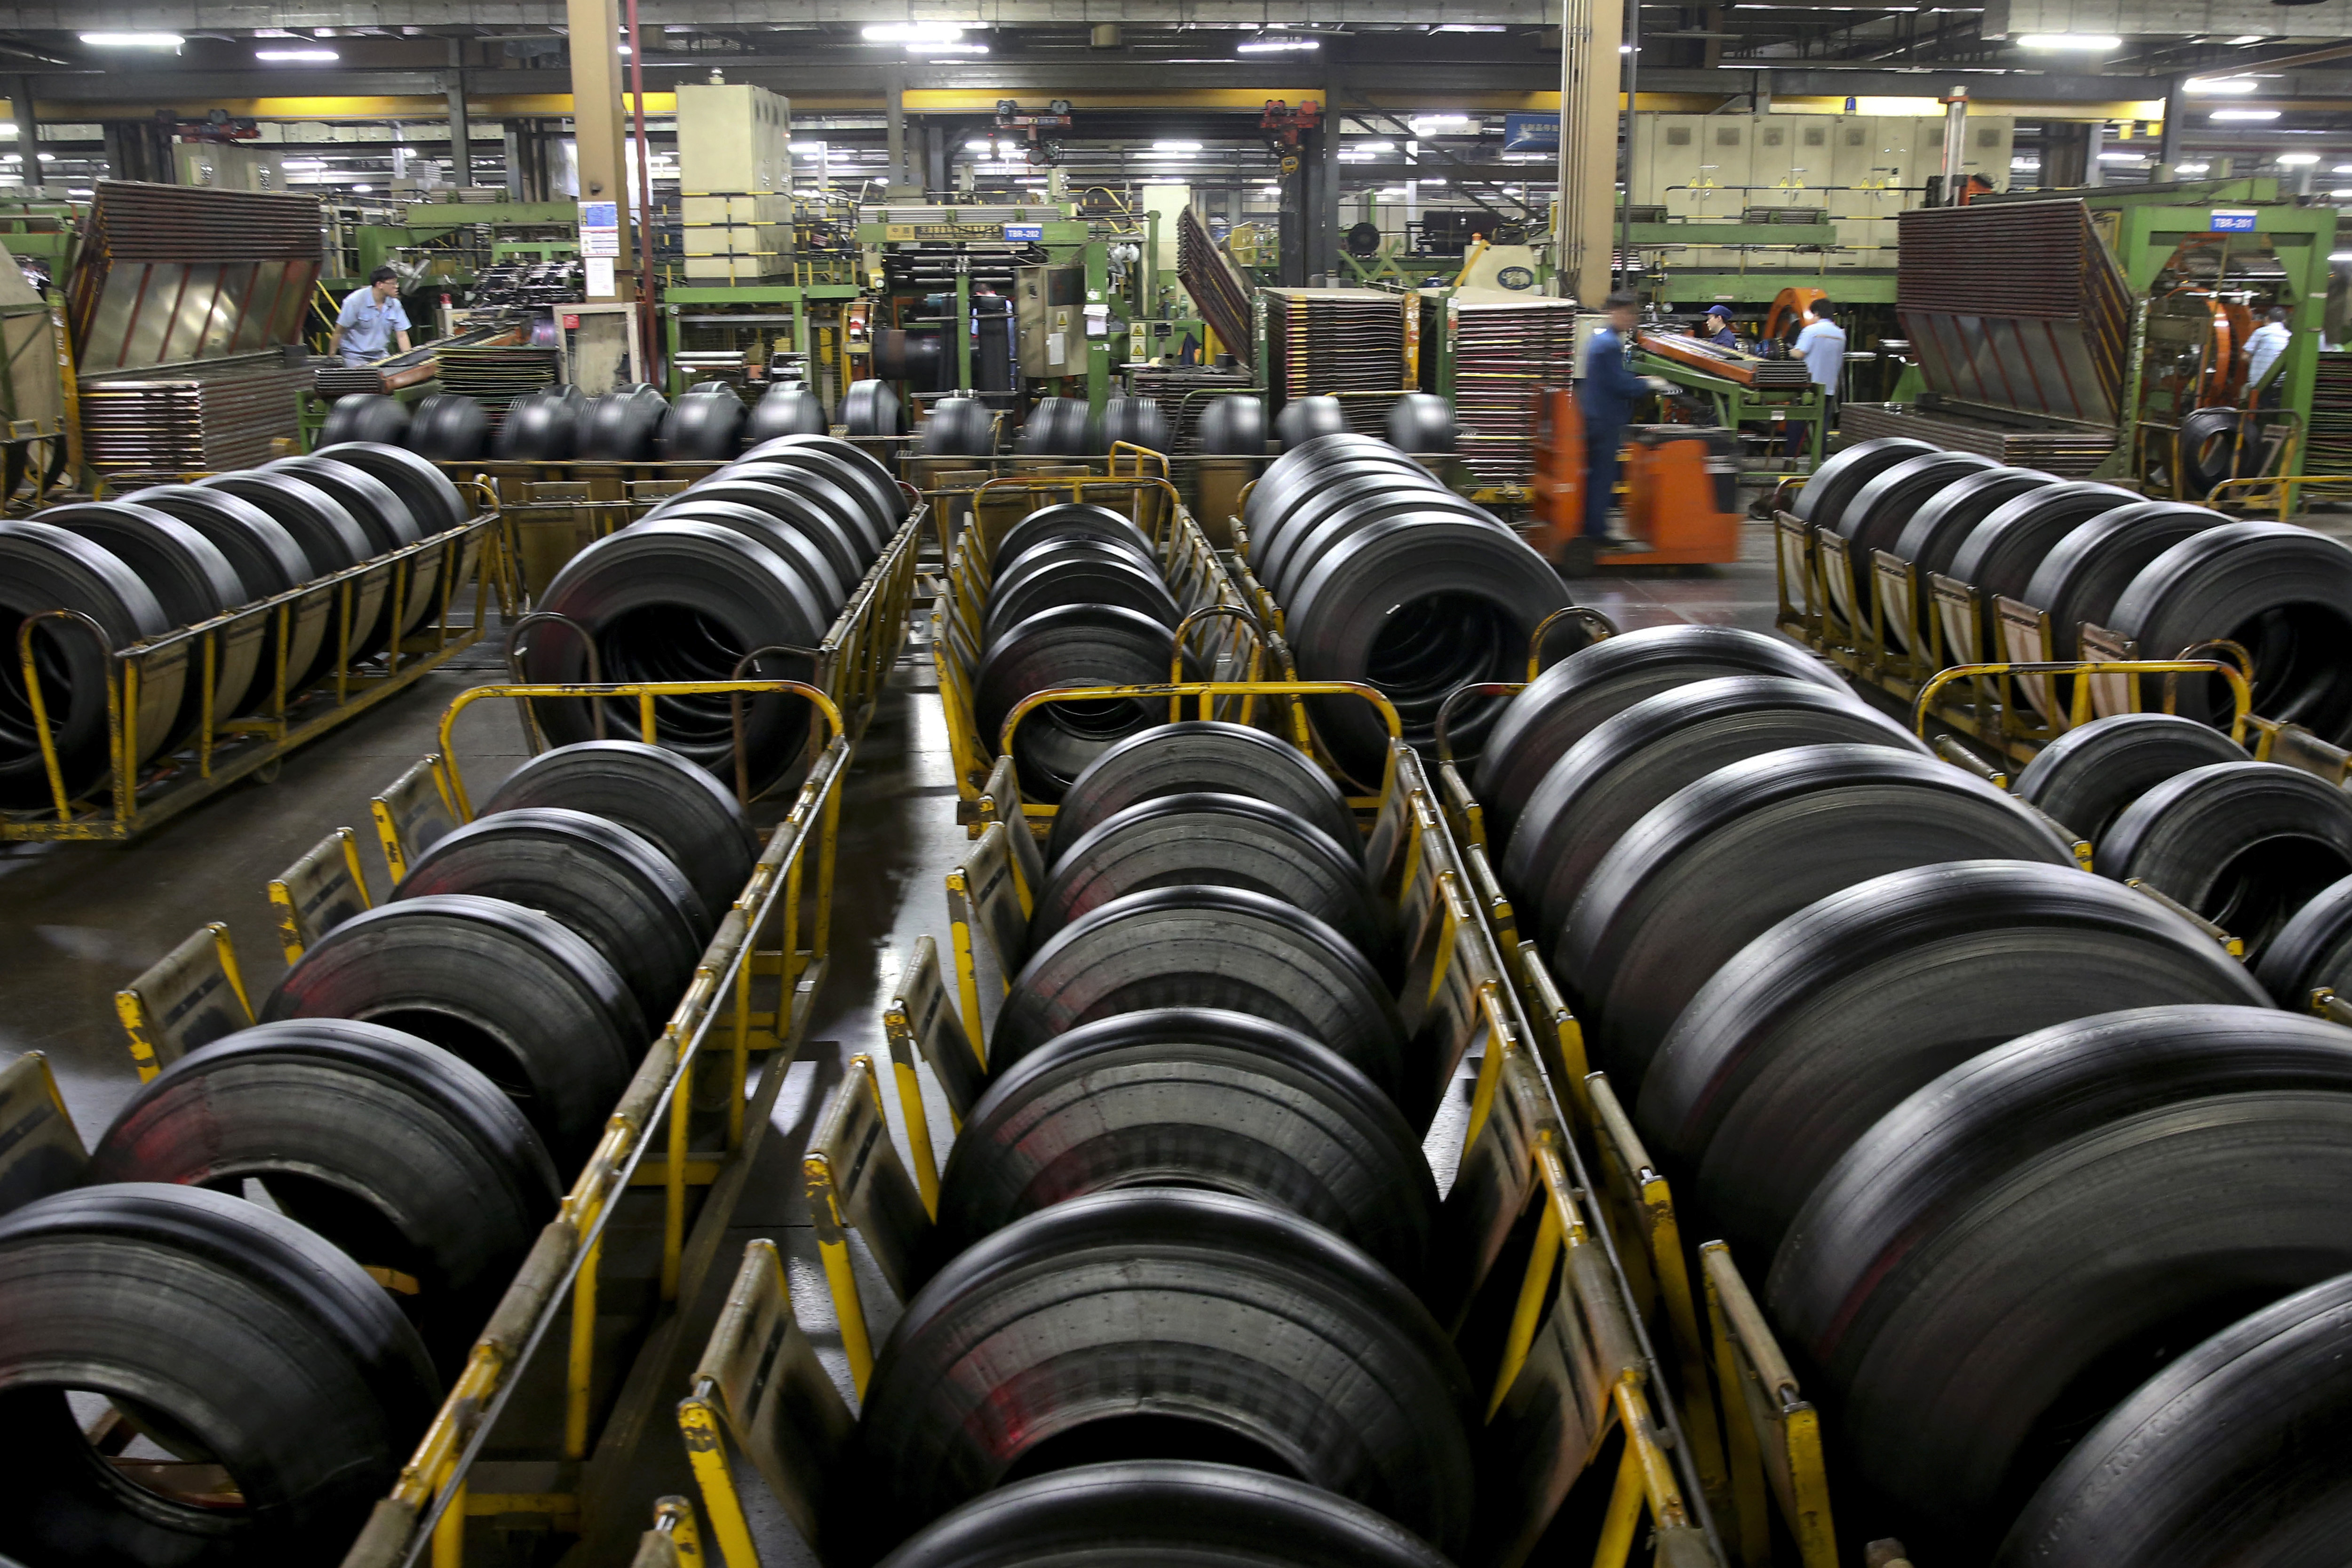 In this April 28, 2019, photo, workers assemble truck's tires at a plant in Nantong city in east China's Jiangsu province Sunday, April 28, 2019. China's exports fell in April amid a bruising tariff war with Washington, adding to pressure on Beijing on the eve of negotiations aimed at settling the fight over its technology ambitions. (Chinatopix via AP)